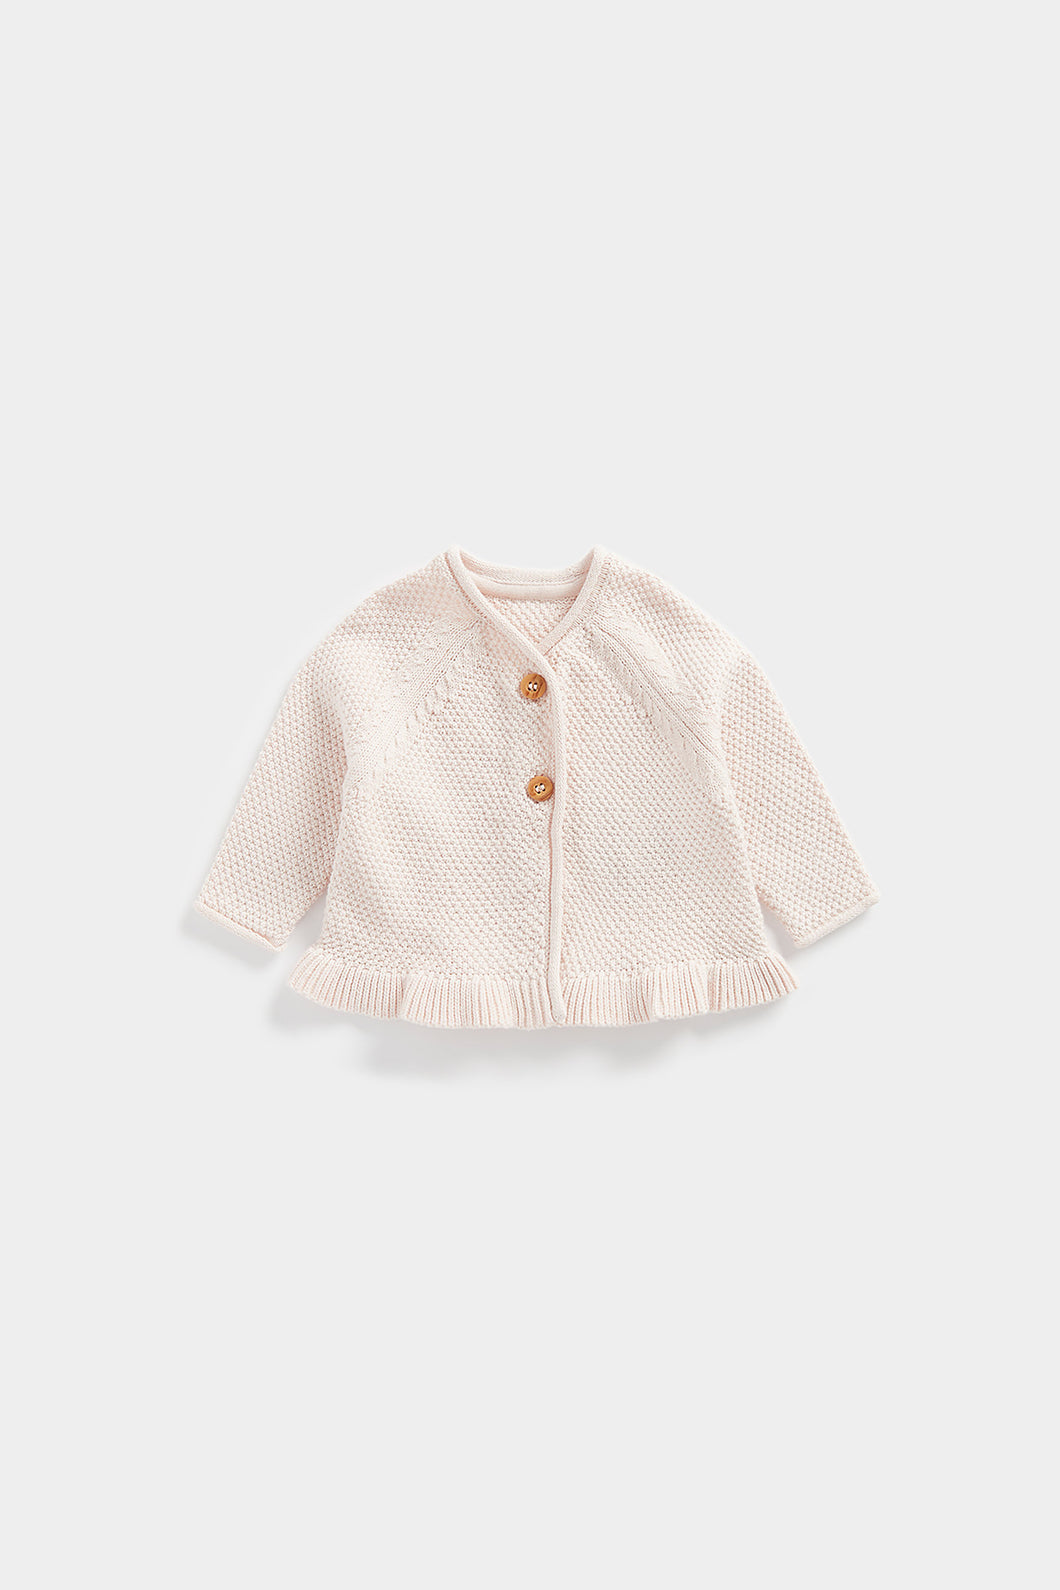 Mothercare Pink Frill Knitted Cardigan